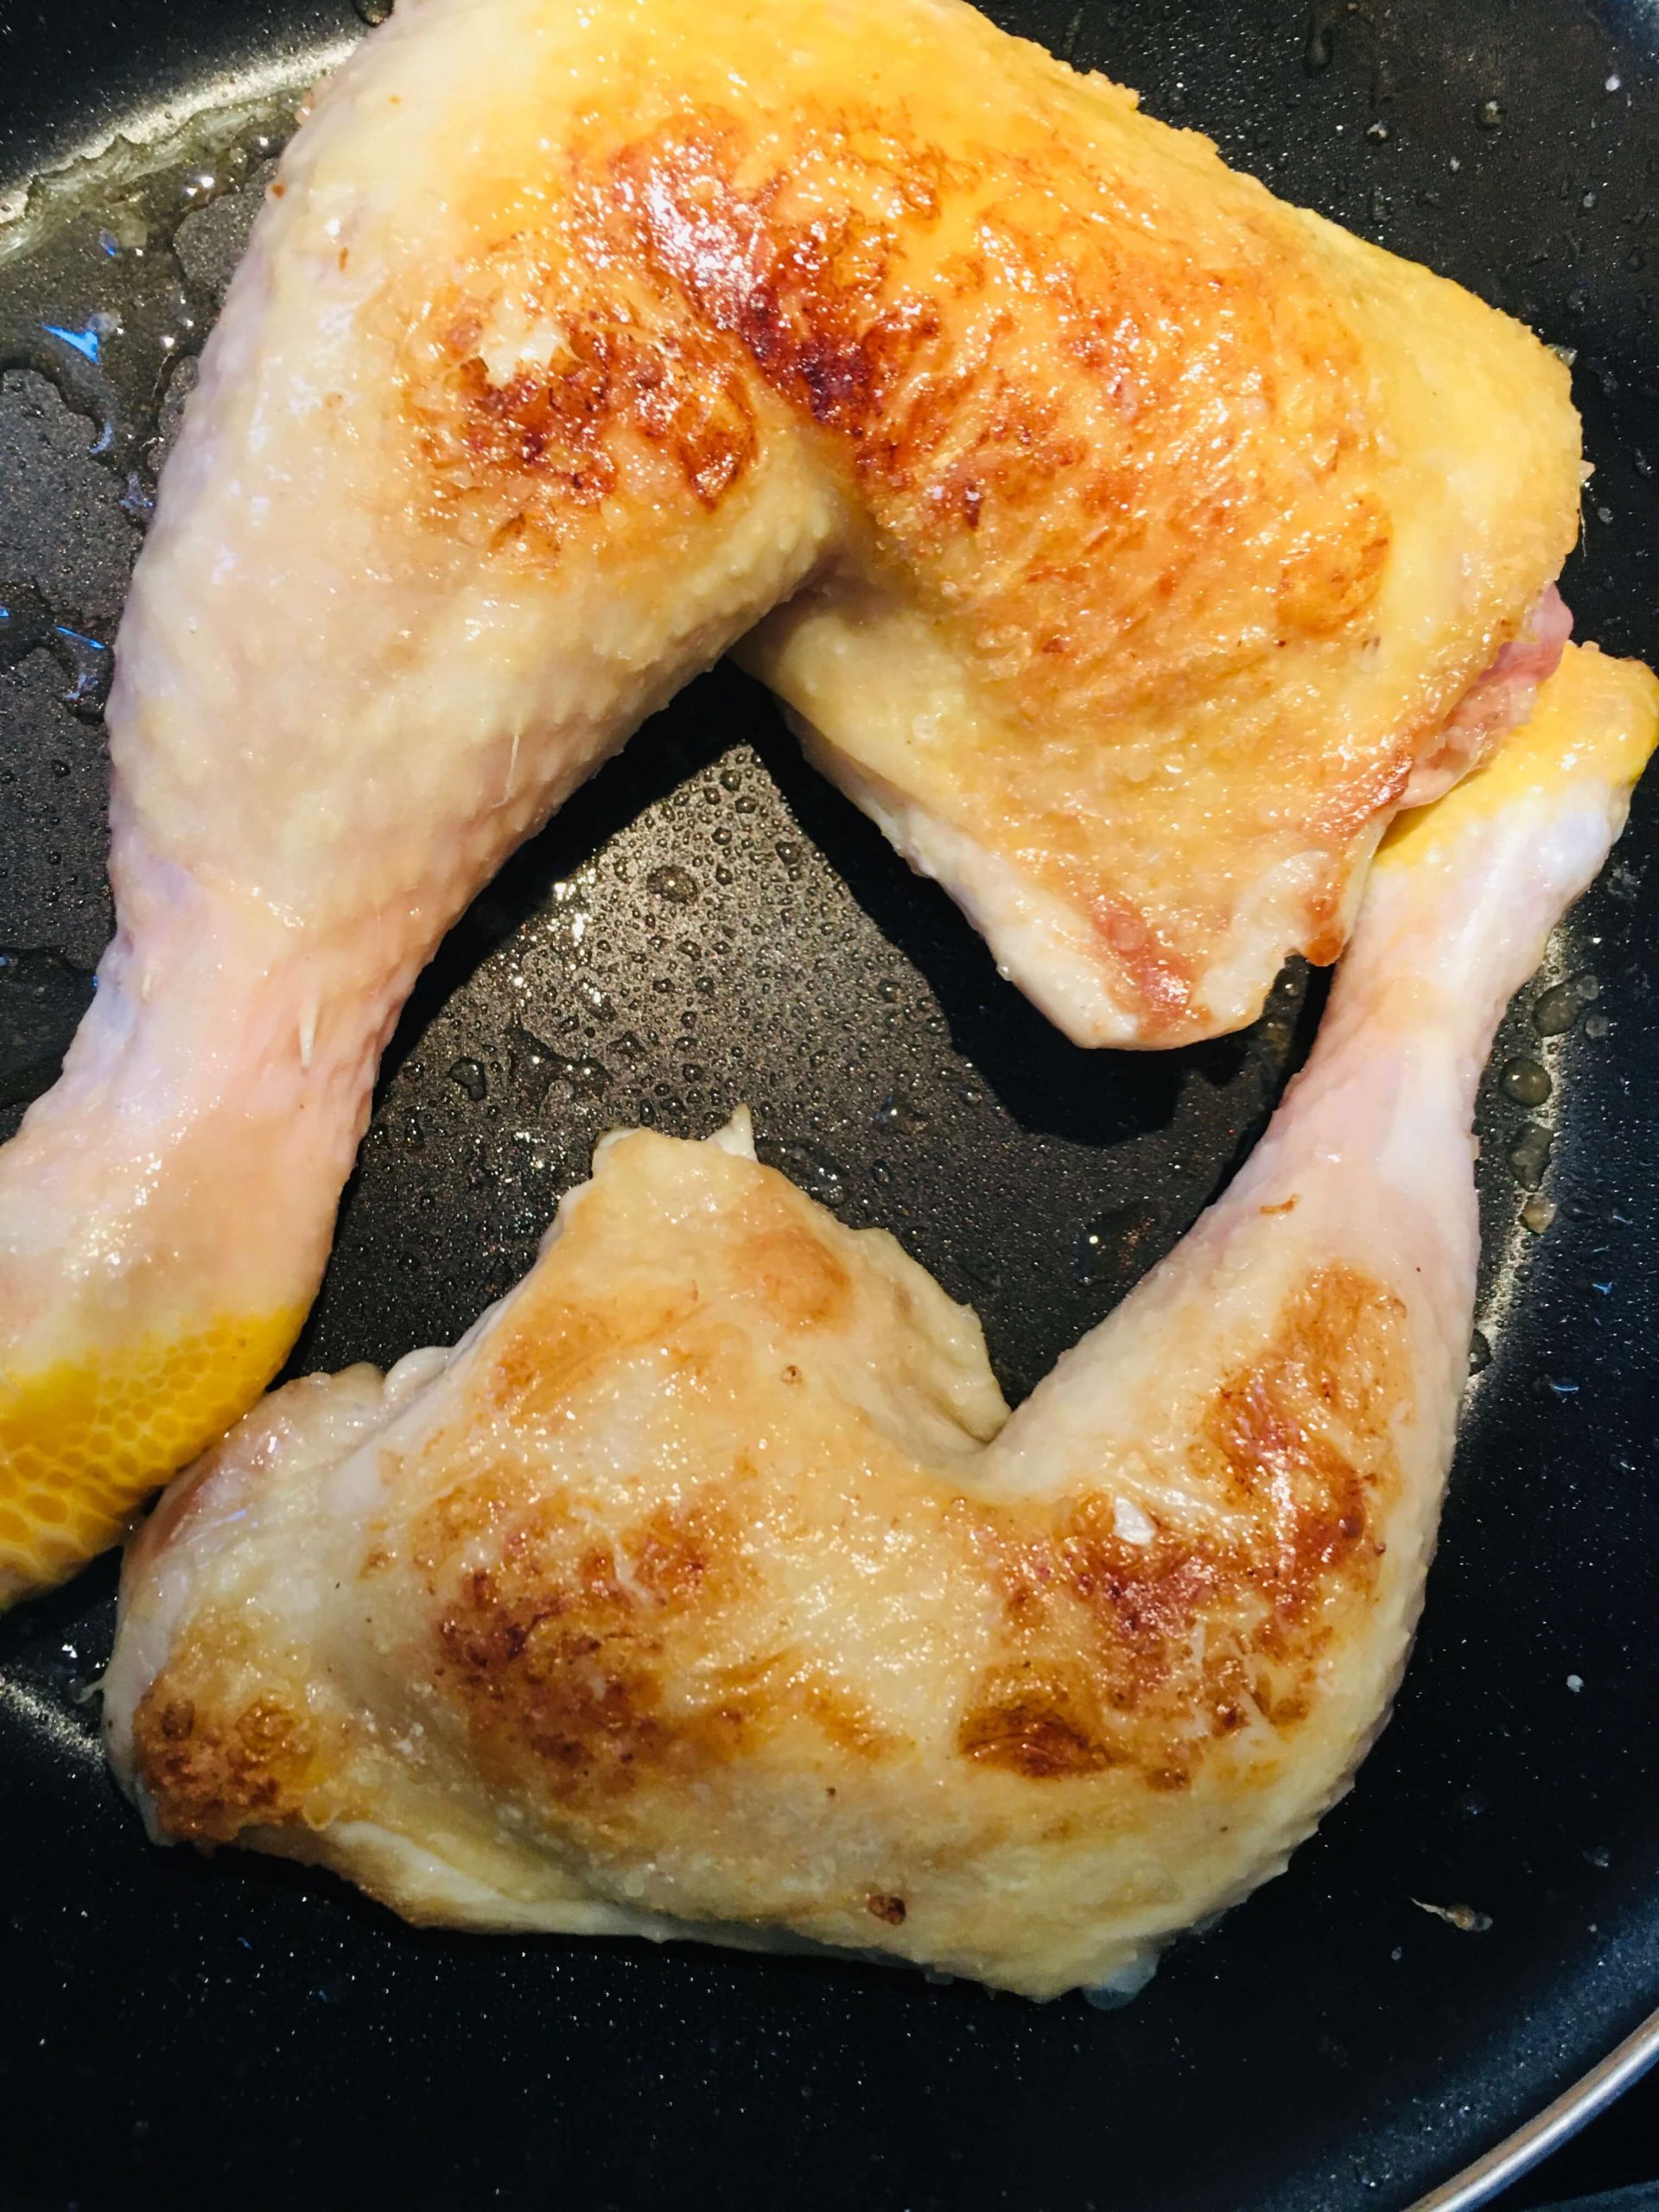 Patrially roasted chicken thighs and legs